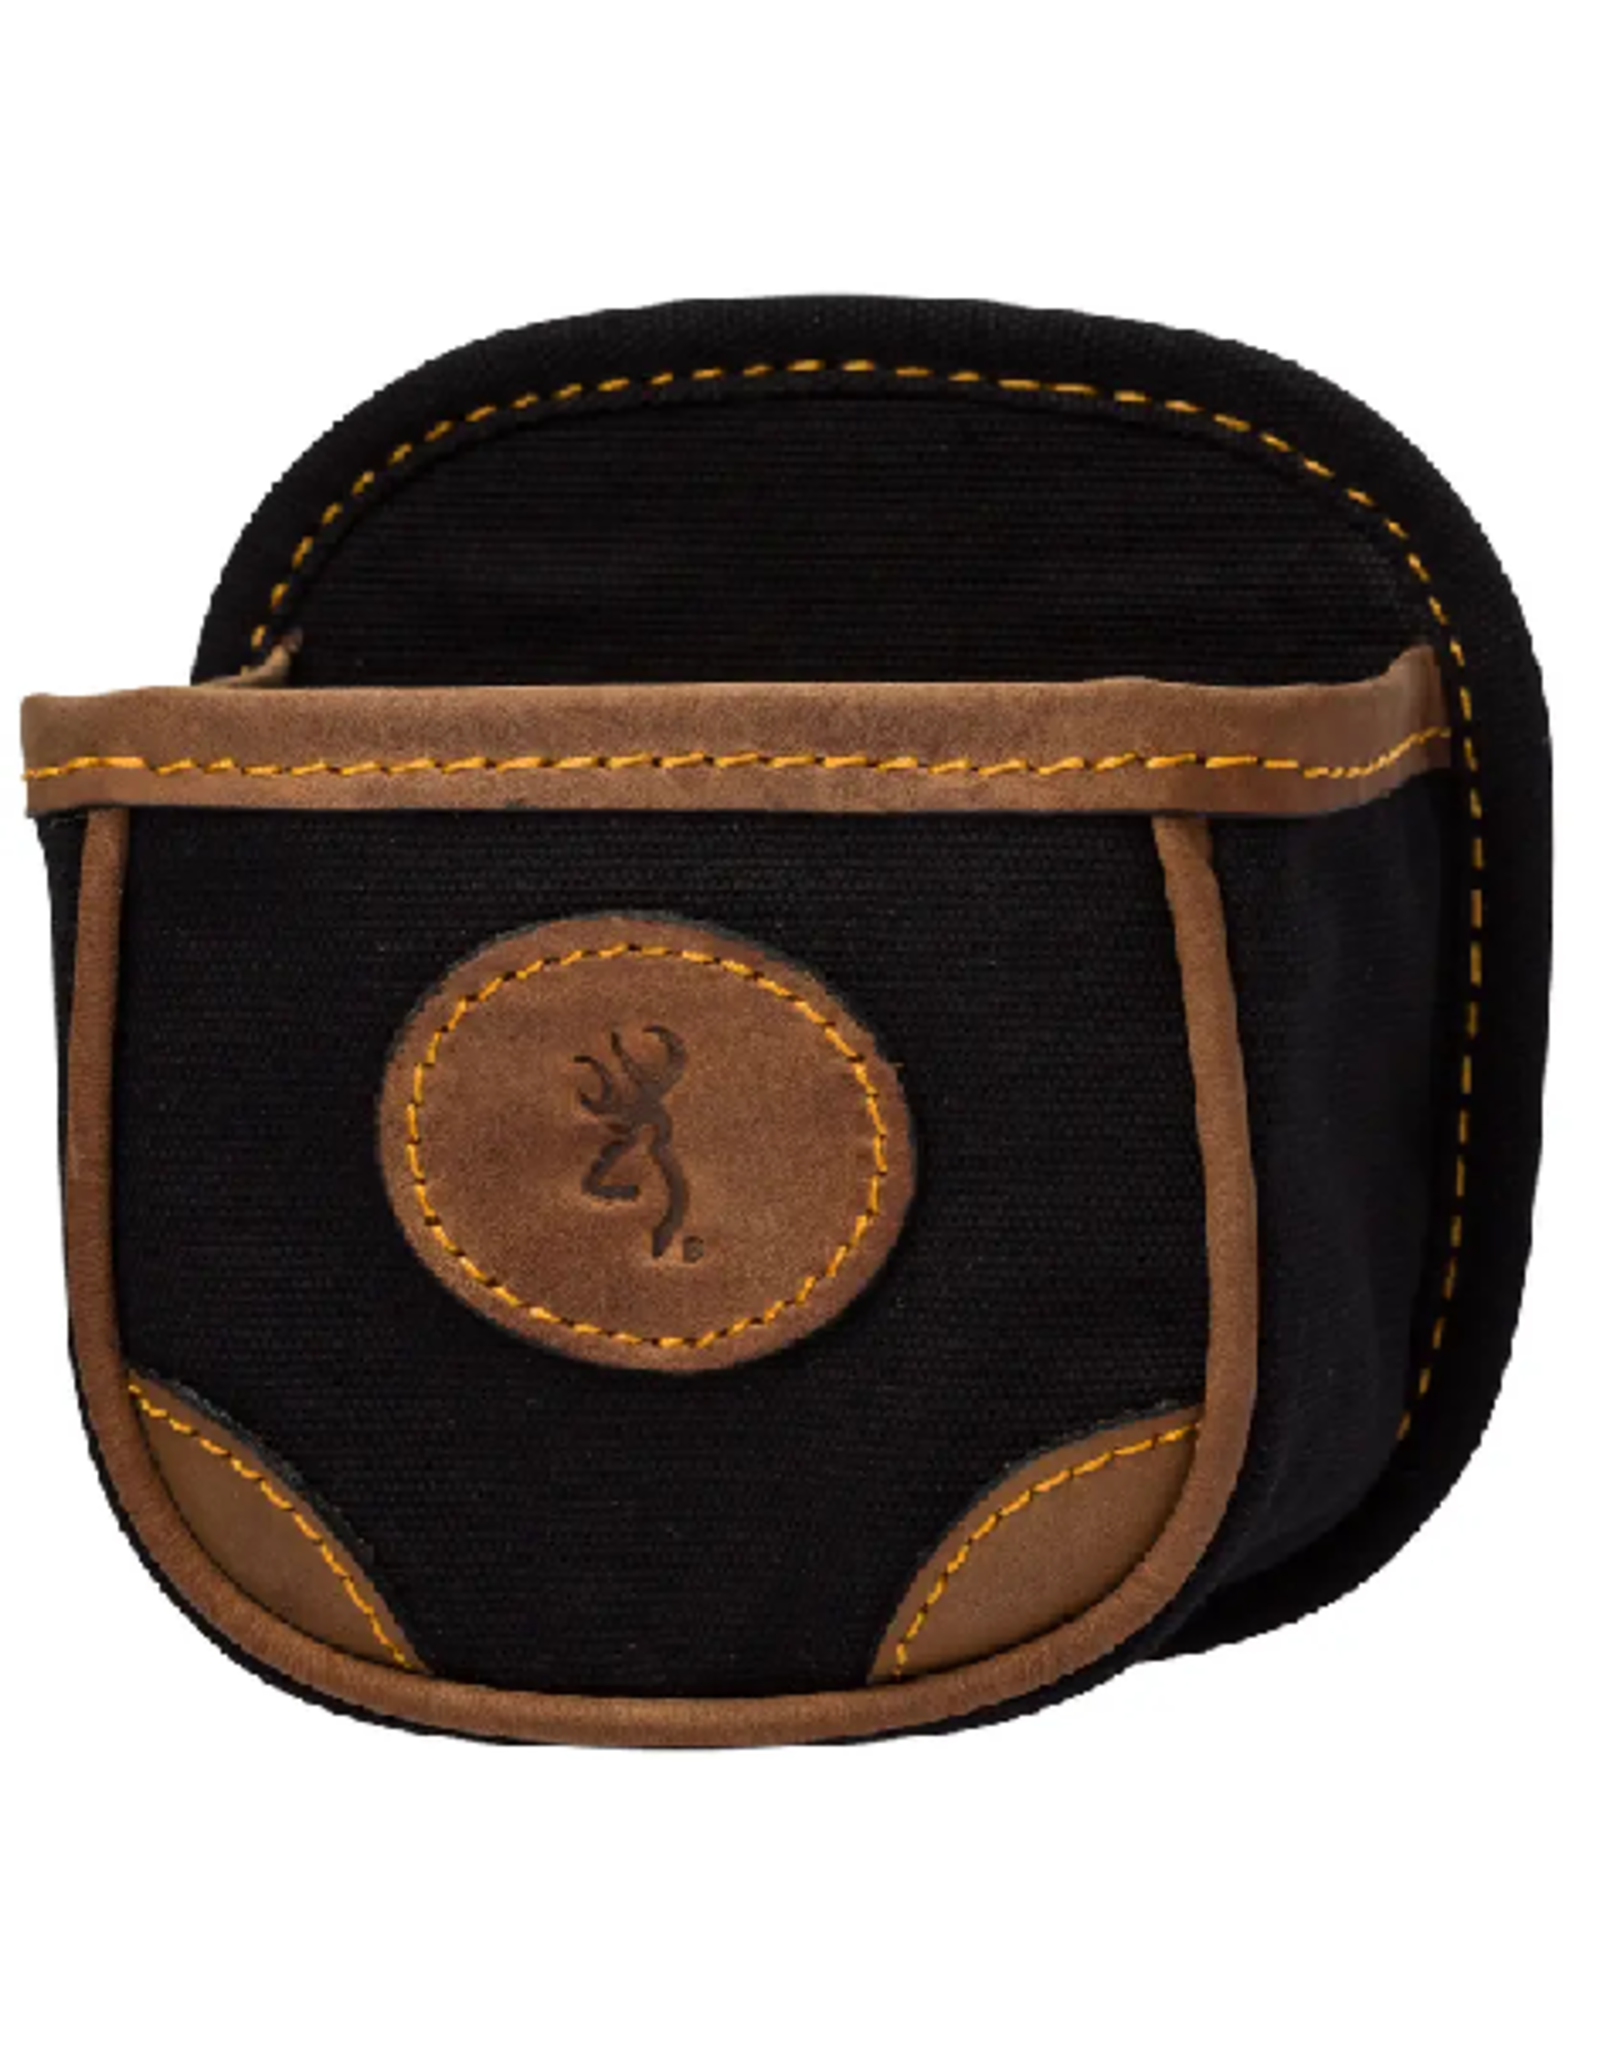 Browning Lona Canvas Leather Shell Pouch - Black